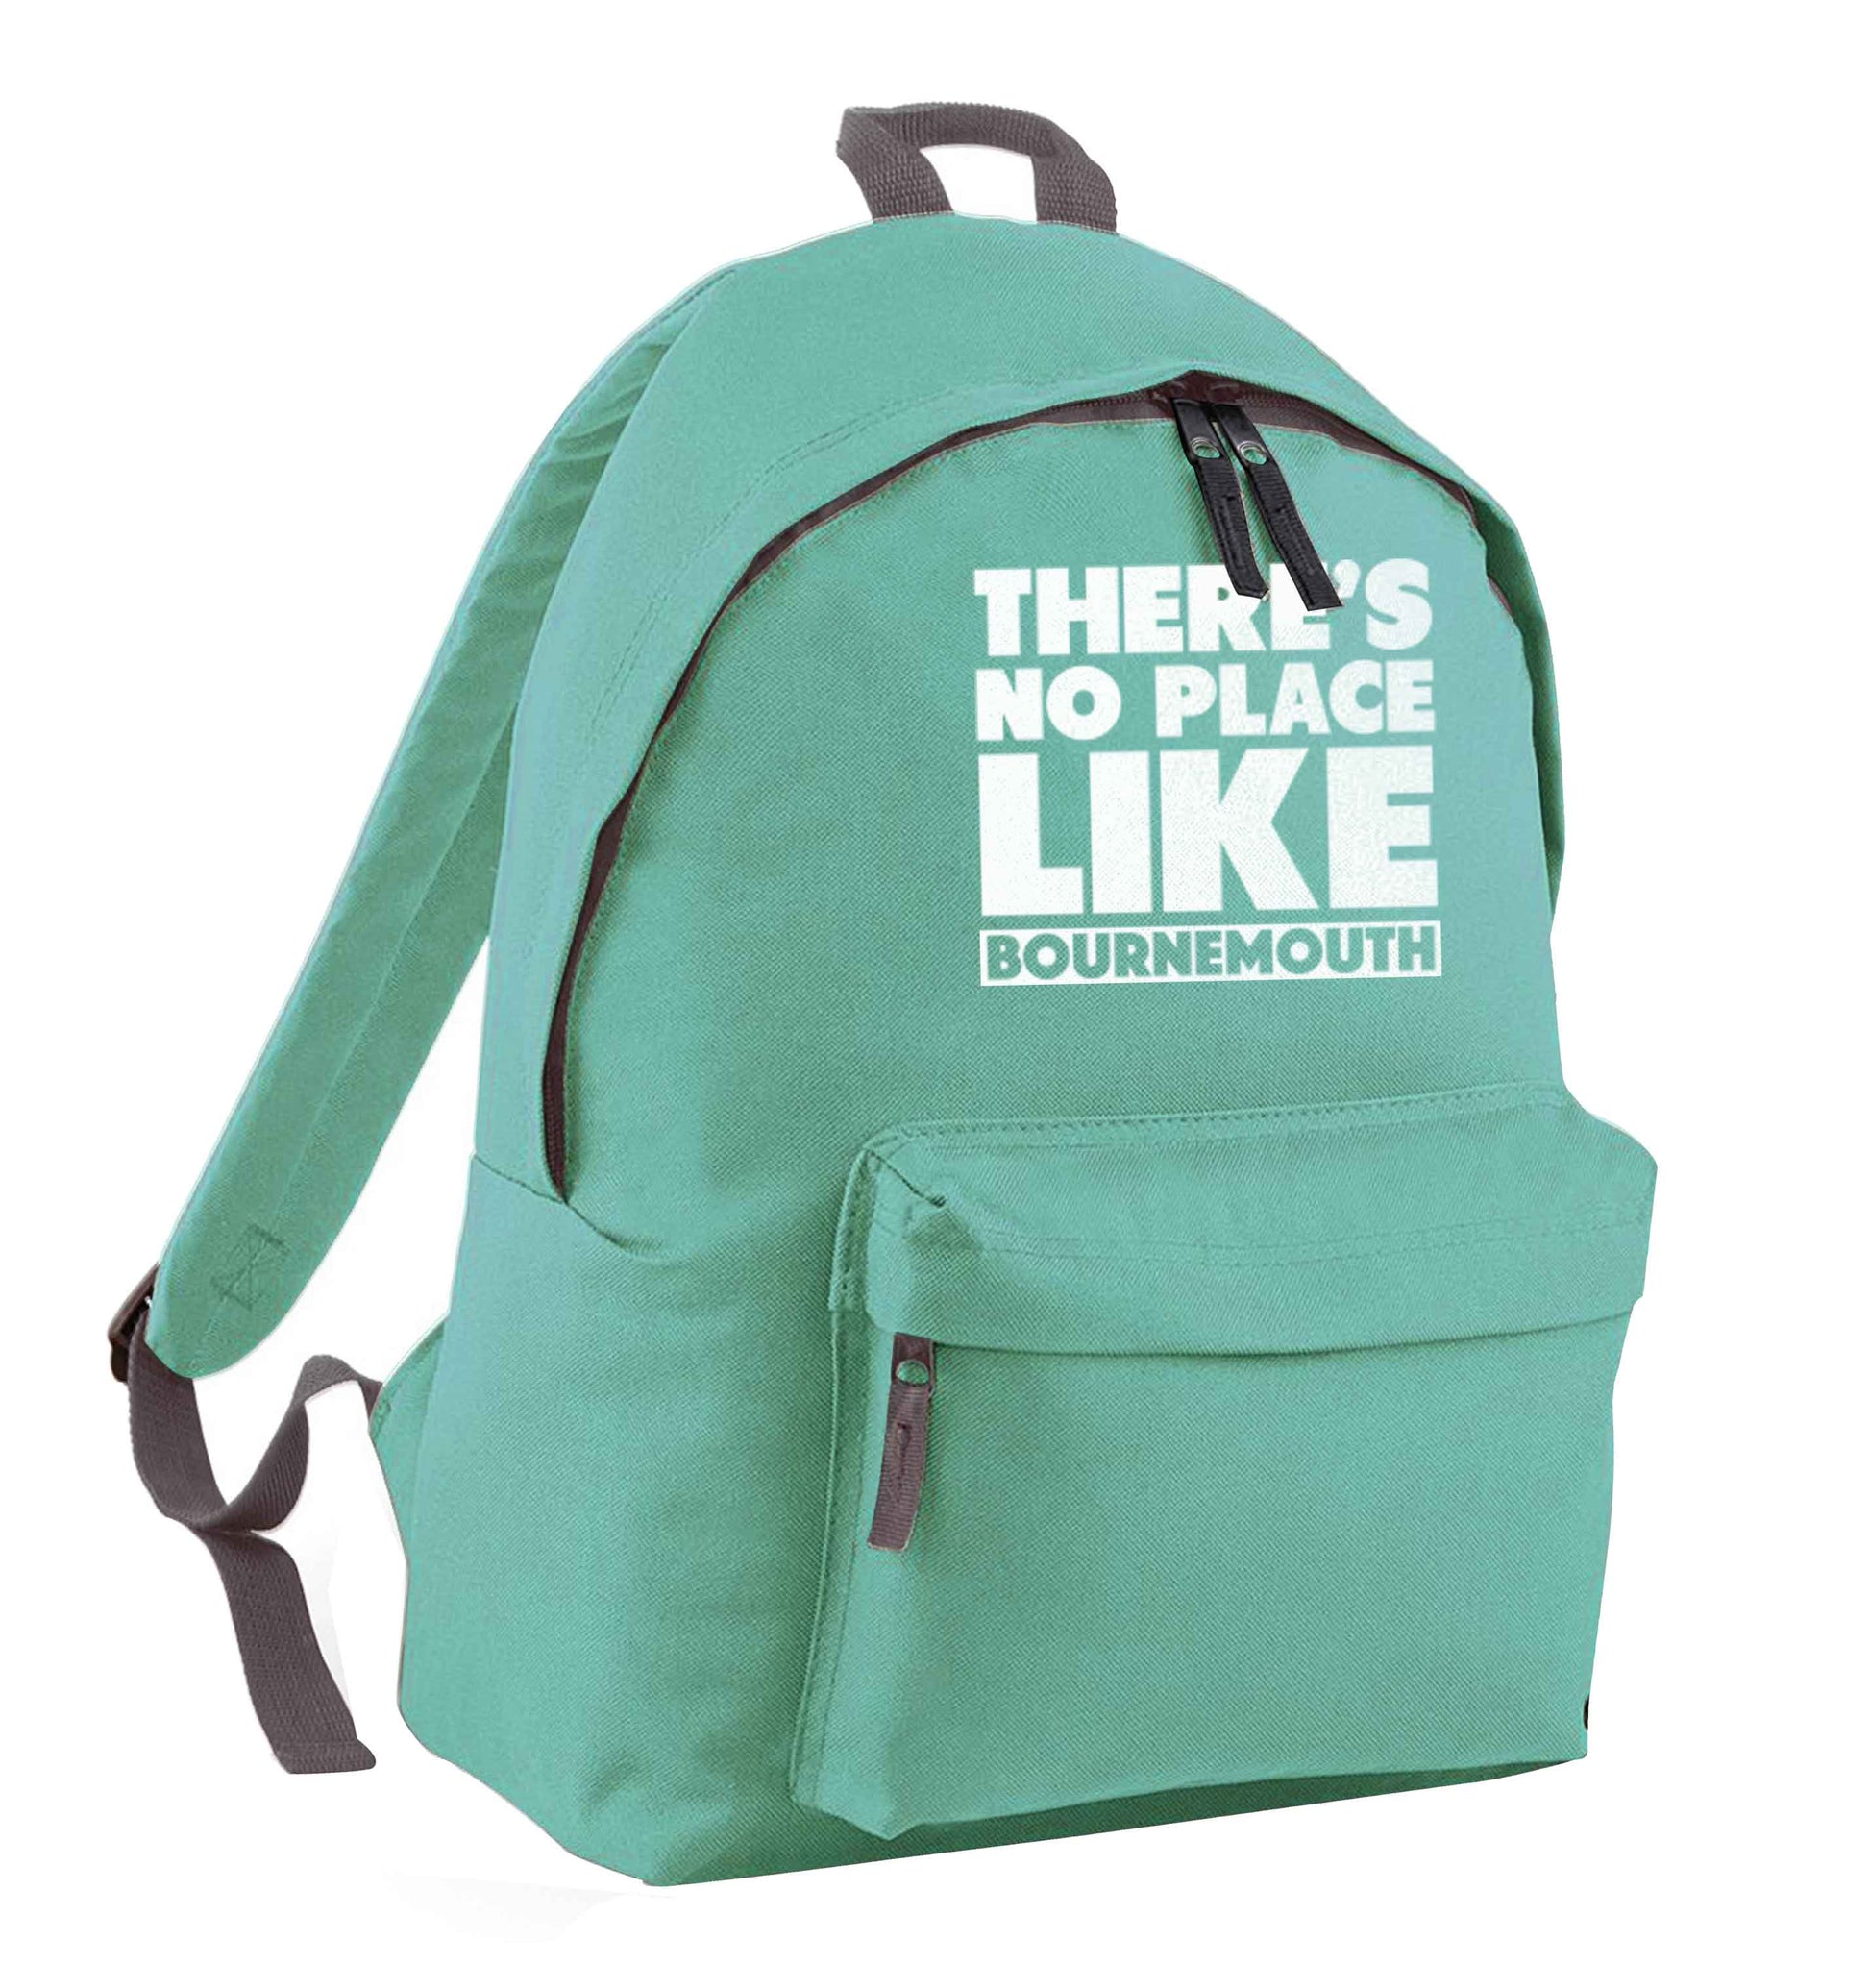 There's no place like Bournemouth mint adults backpack